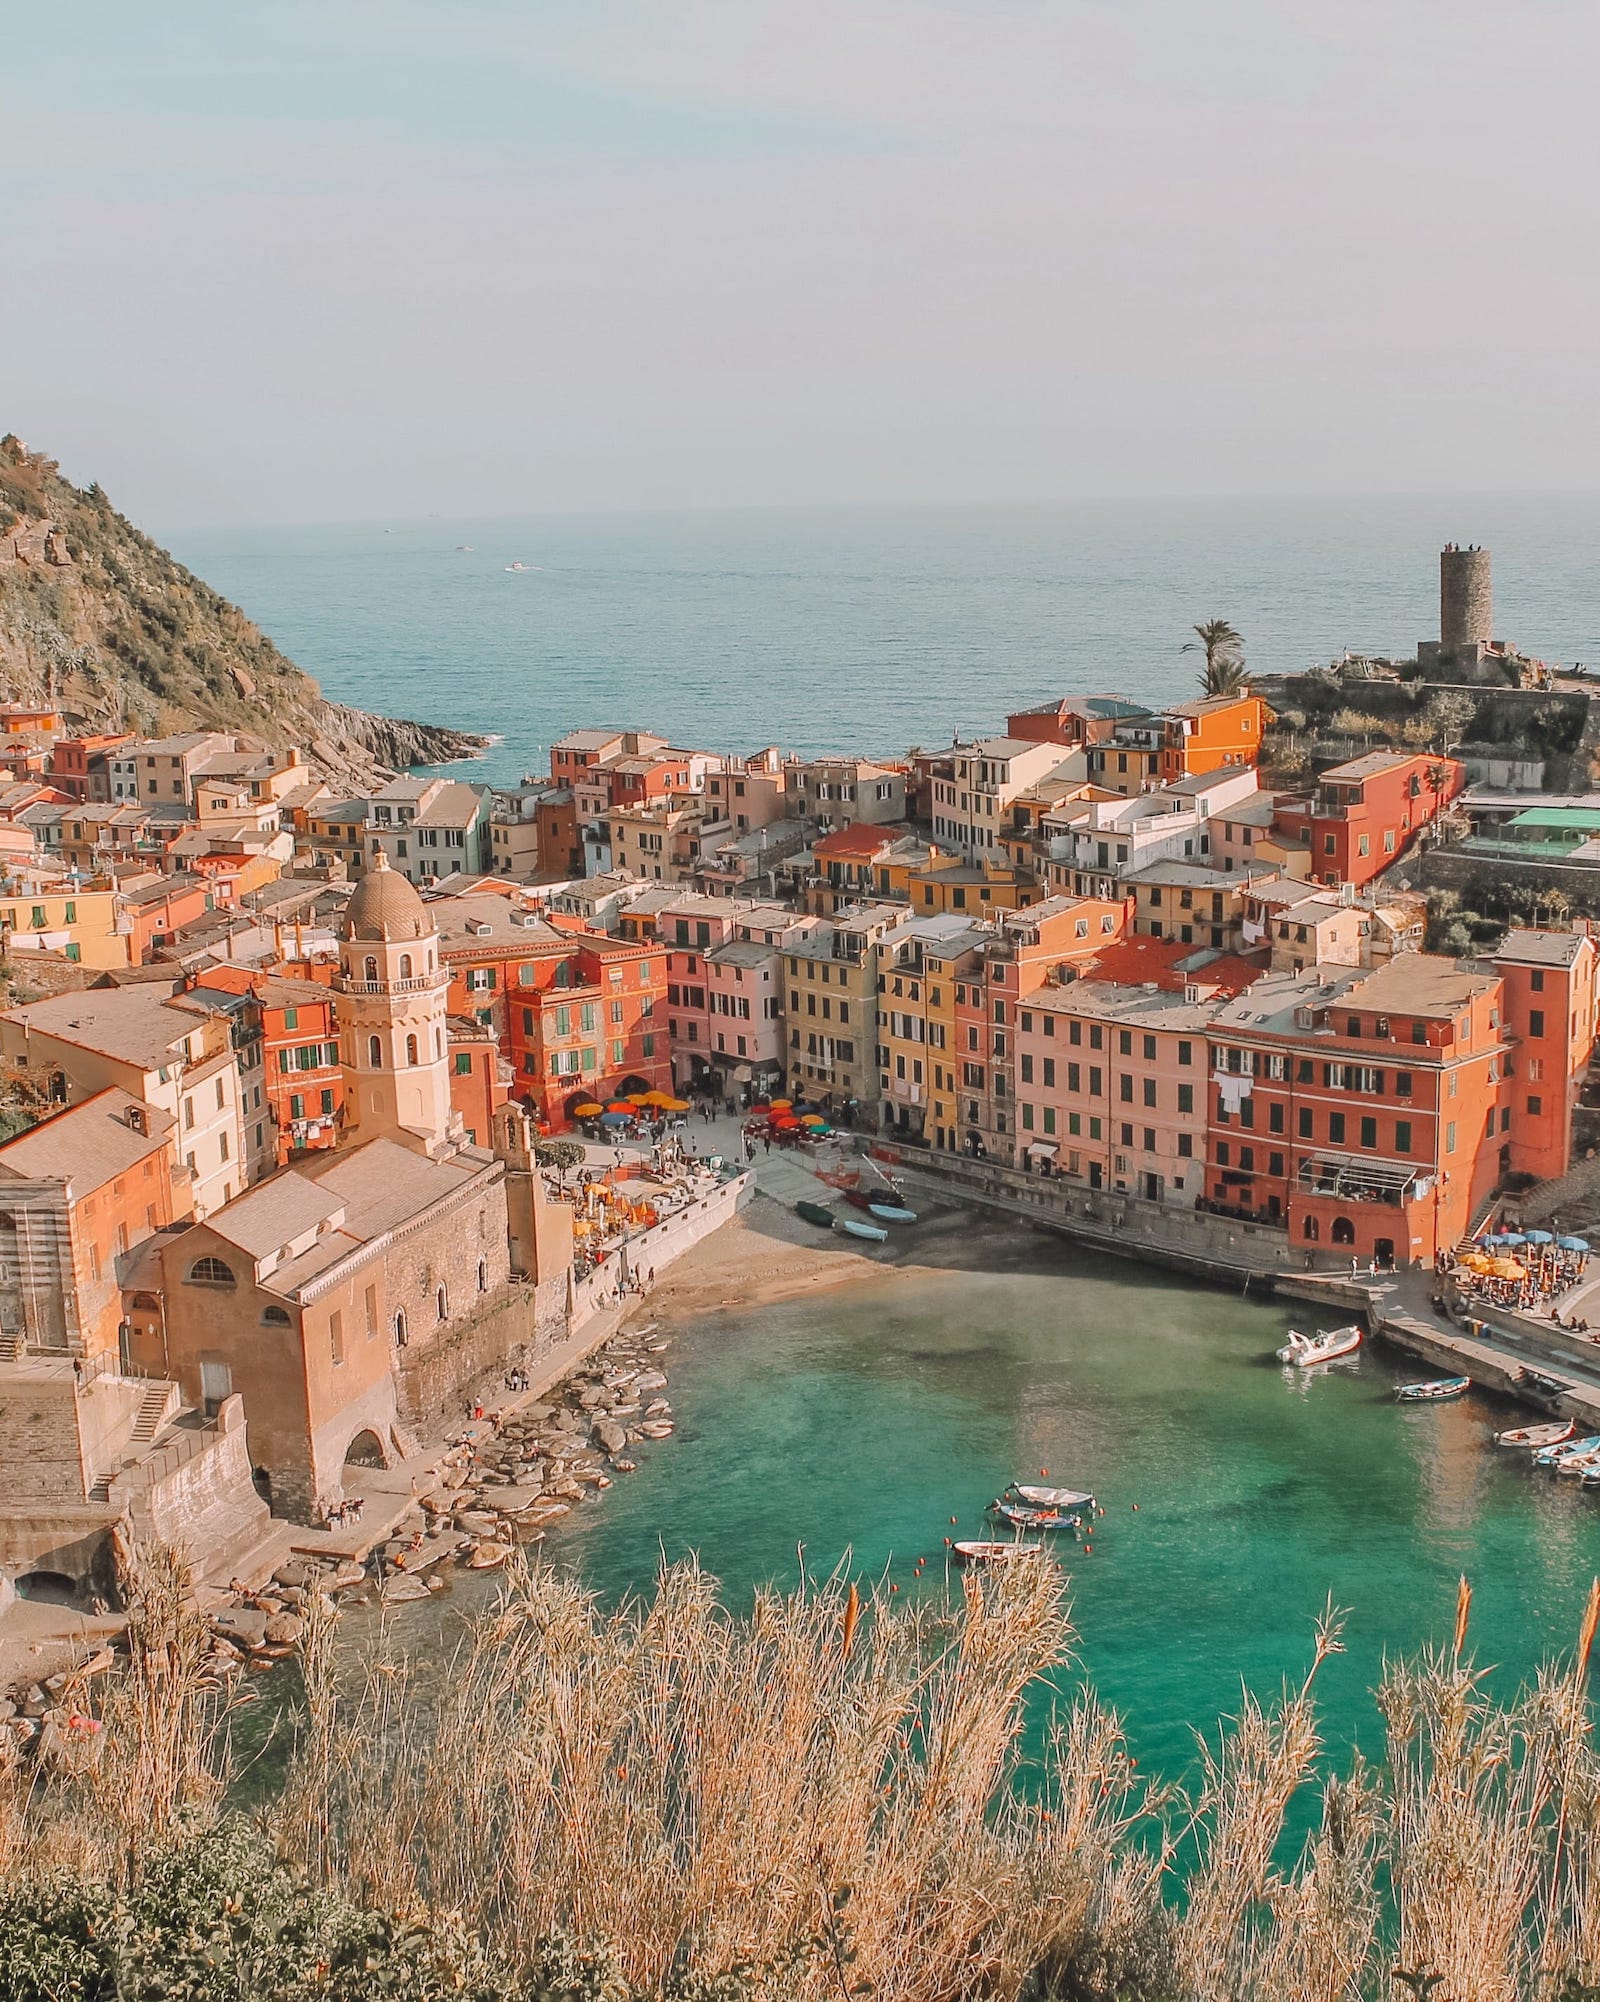 The Complete Guide To Visiting Cinque Terre in Italy